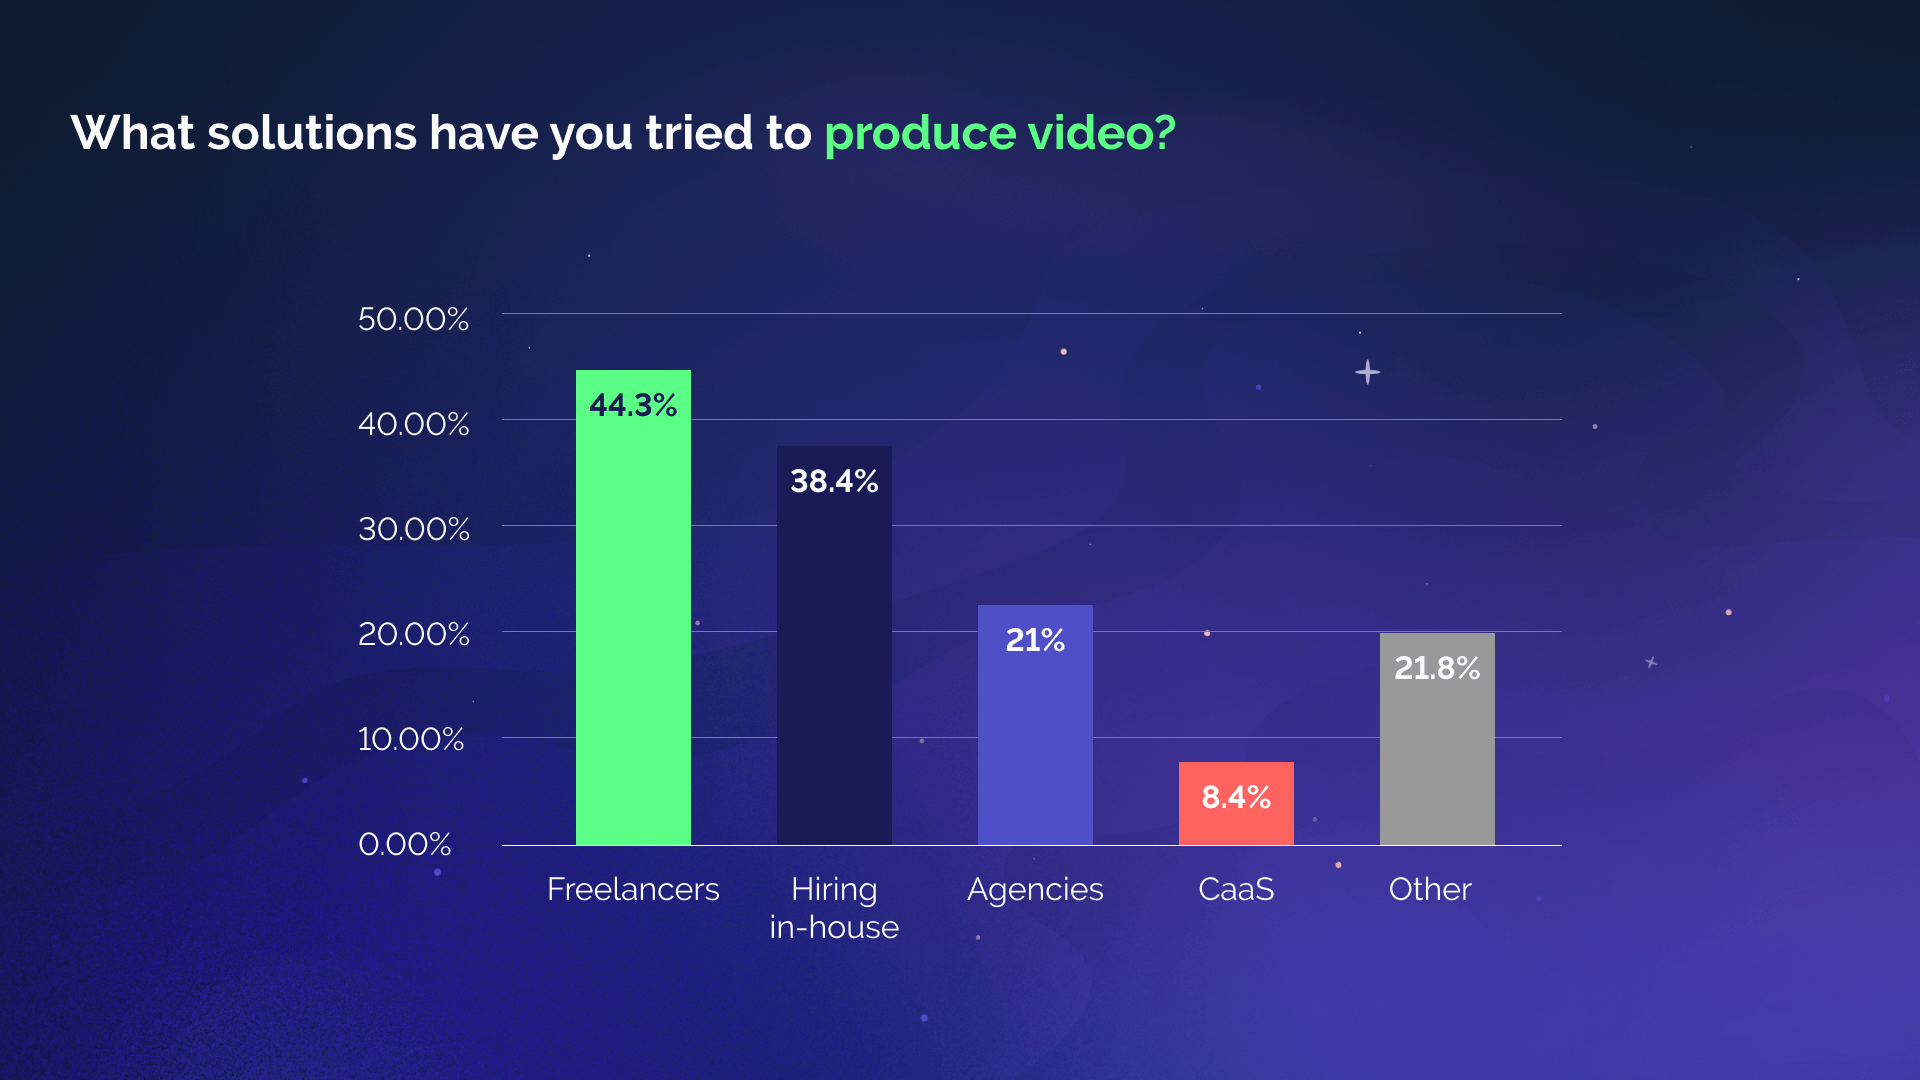 What solutions have you tried to produce video?